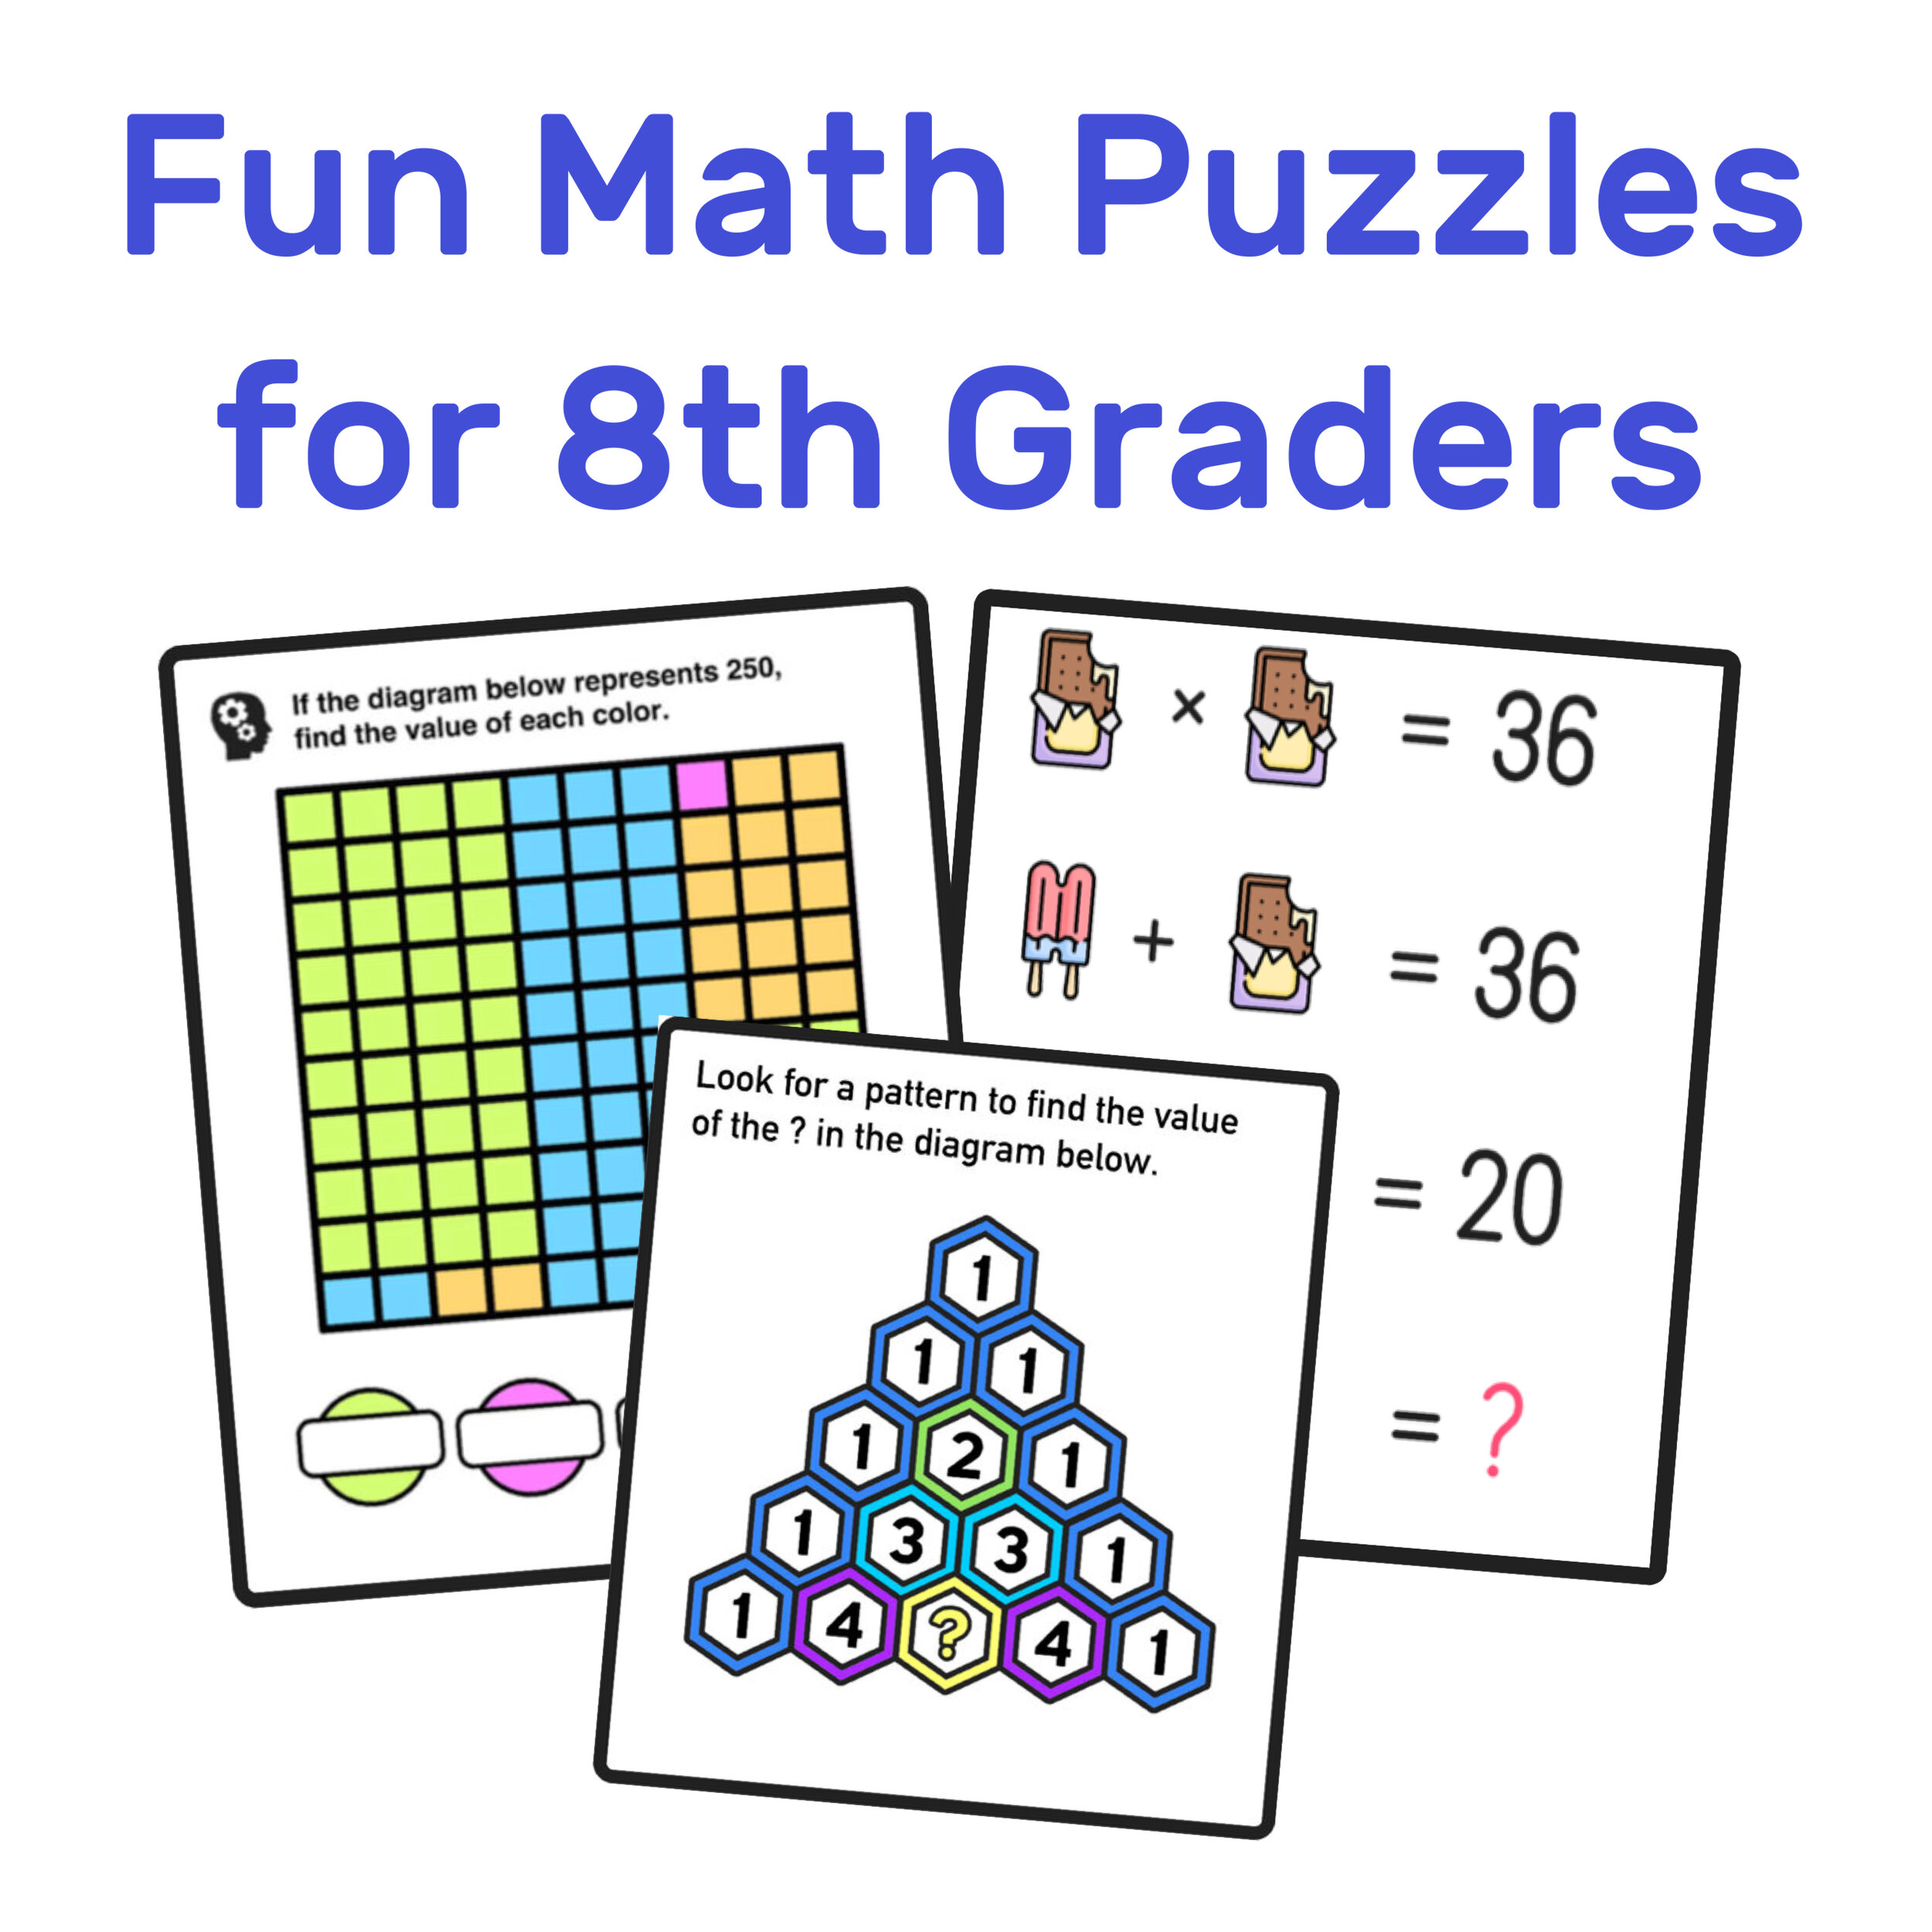 The Best Free 8th Grade Math Resources: Complete List! — Mashup Math